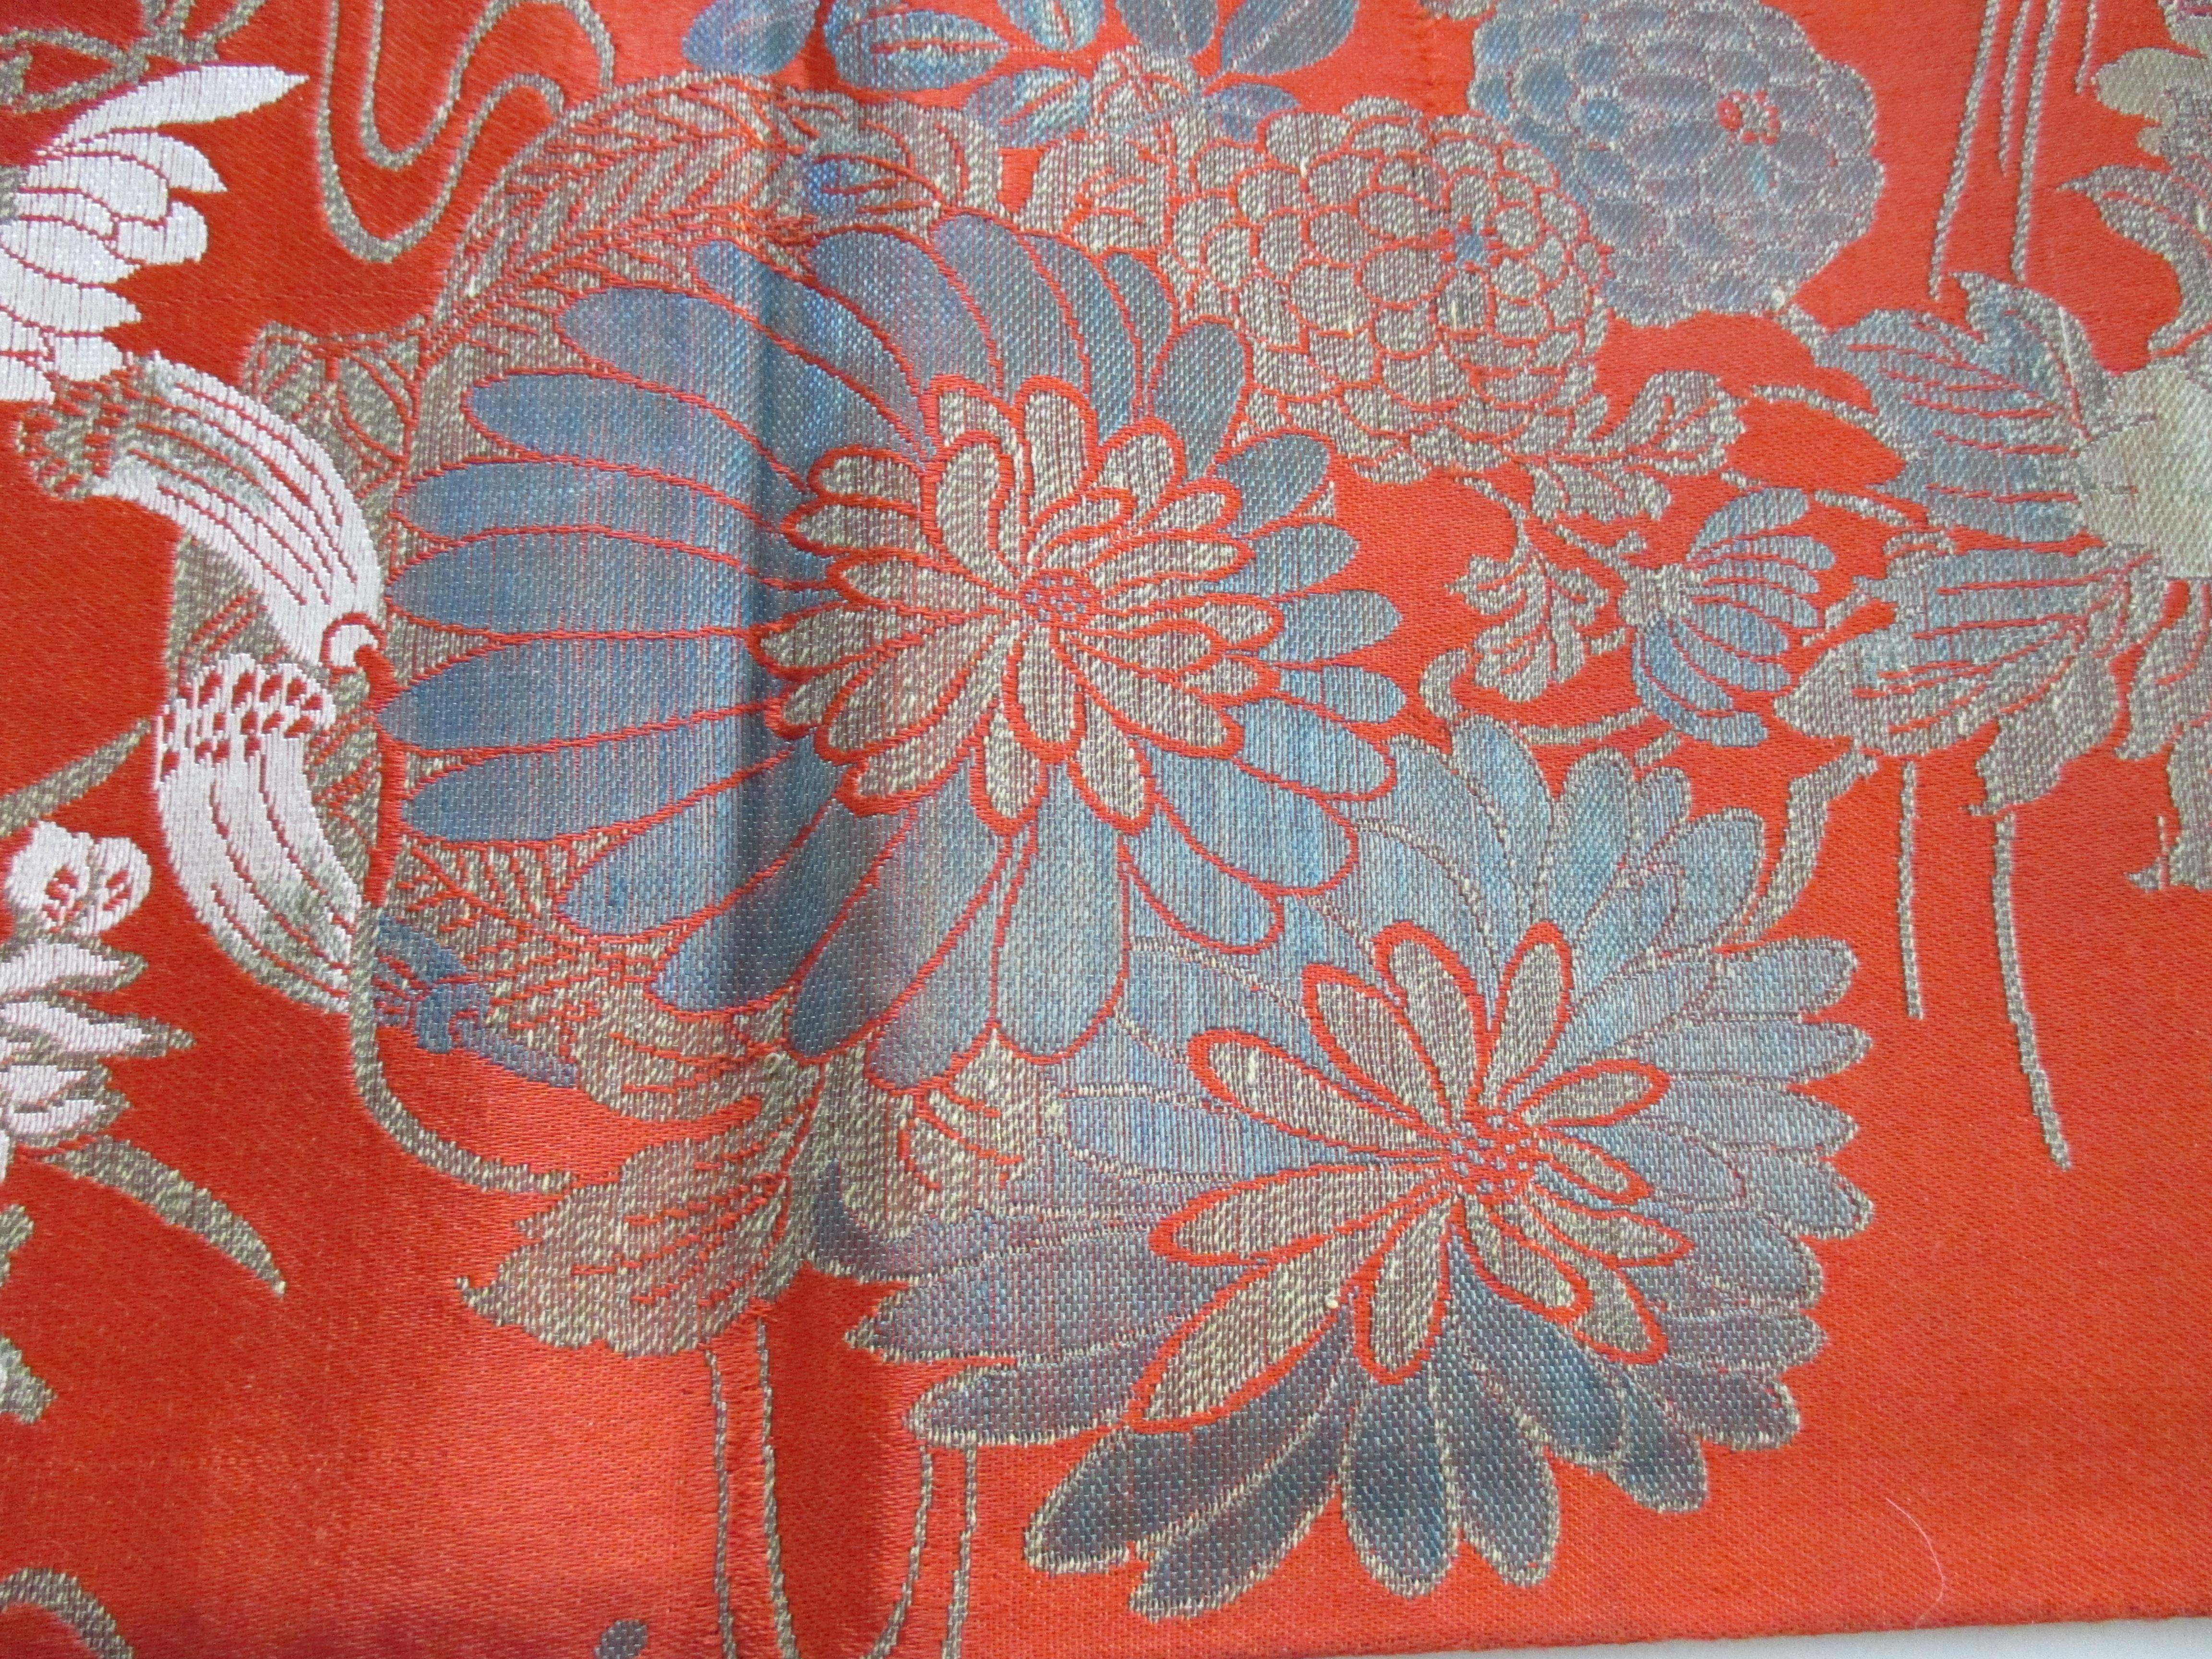 Vintage burnt orange floral silk textile with chrysanthemums and lilies.
Ideal for pillows and upholstery.
Size: 19.5